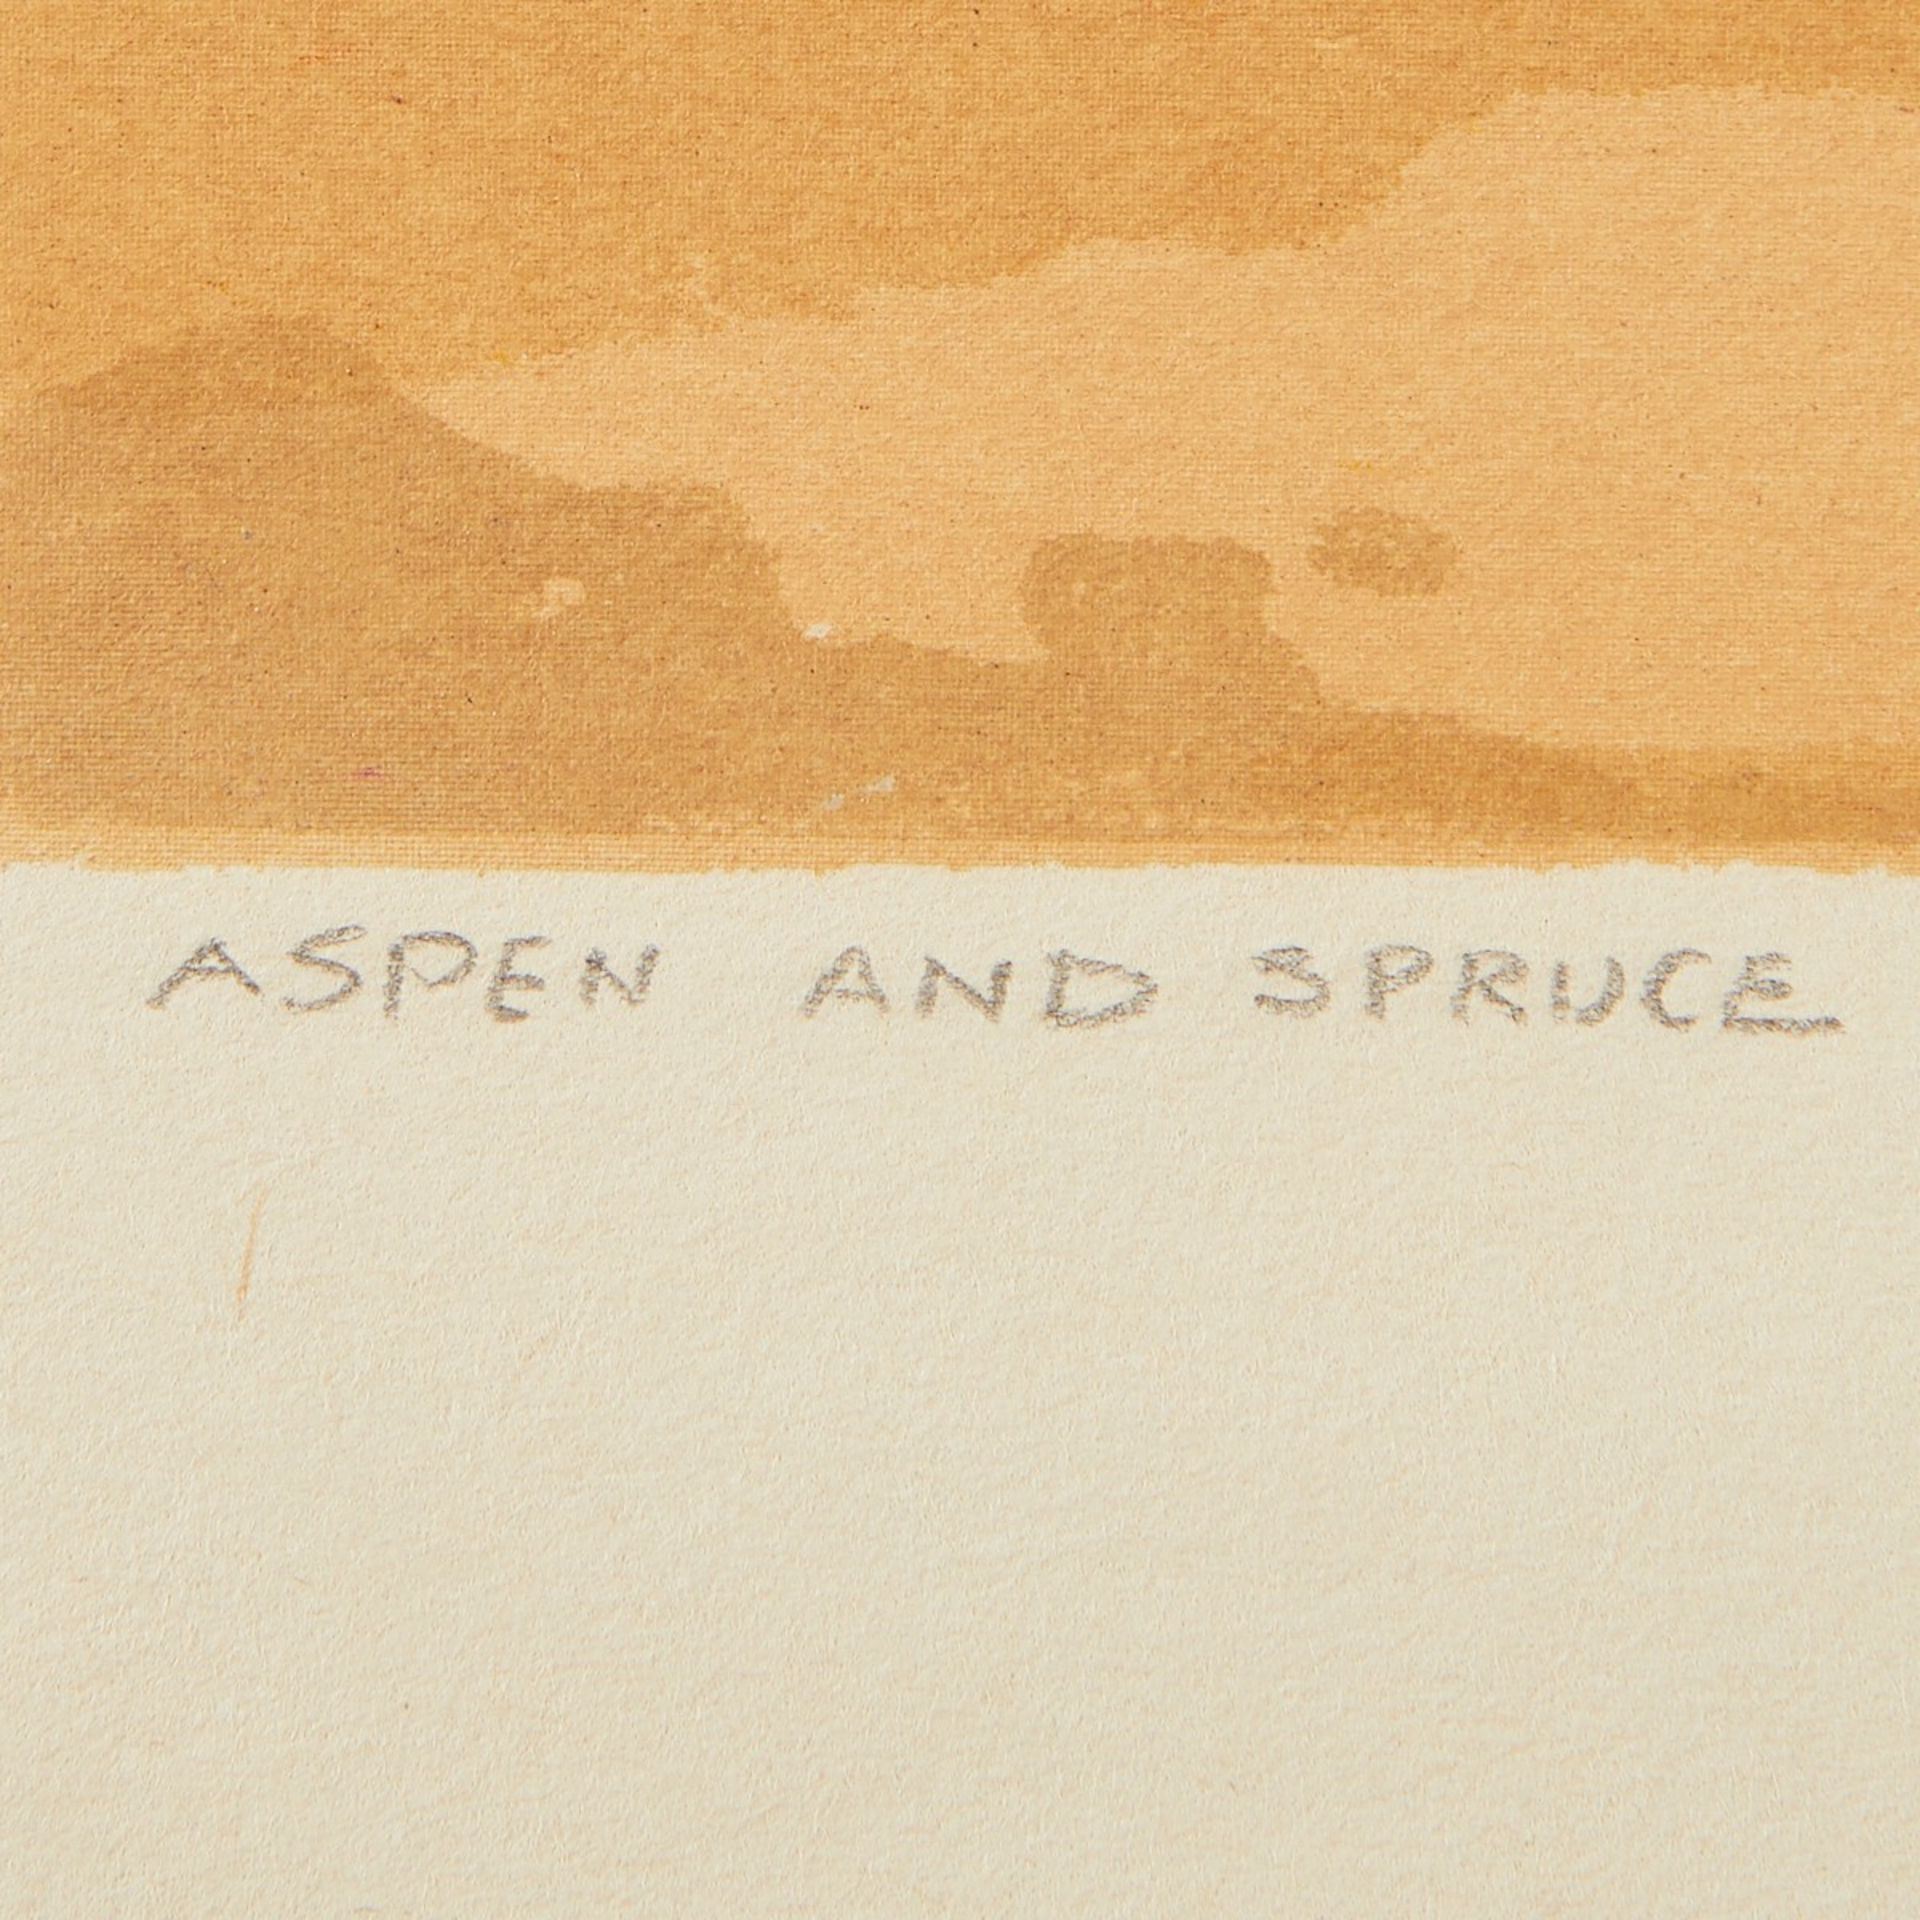 Norma Bassett Hall "Aspen and Spruce" Serigraph - Image 3 of 5